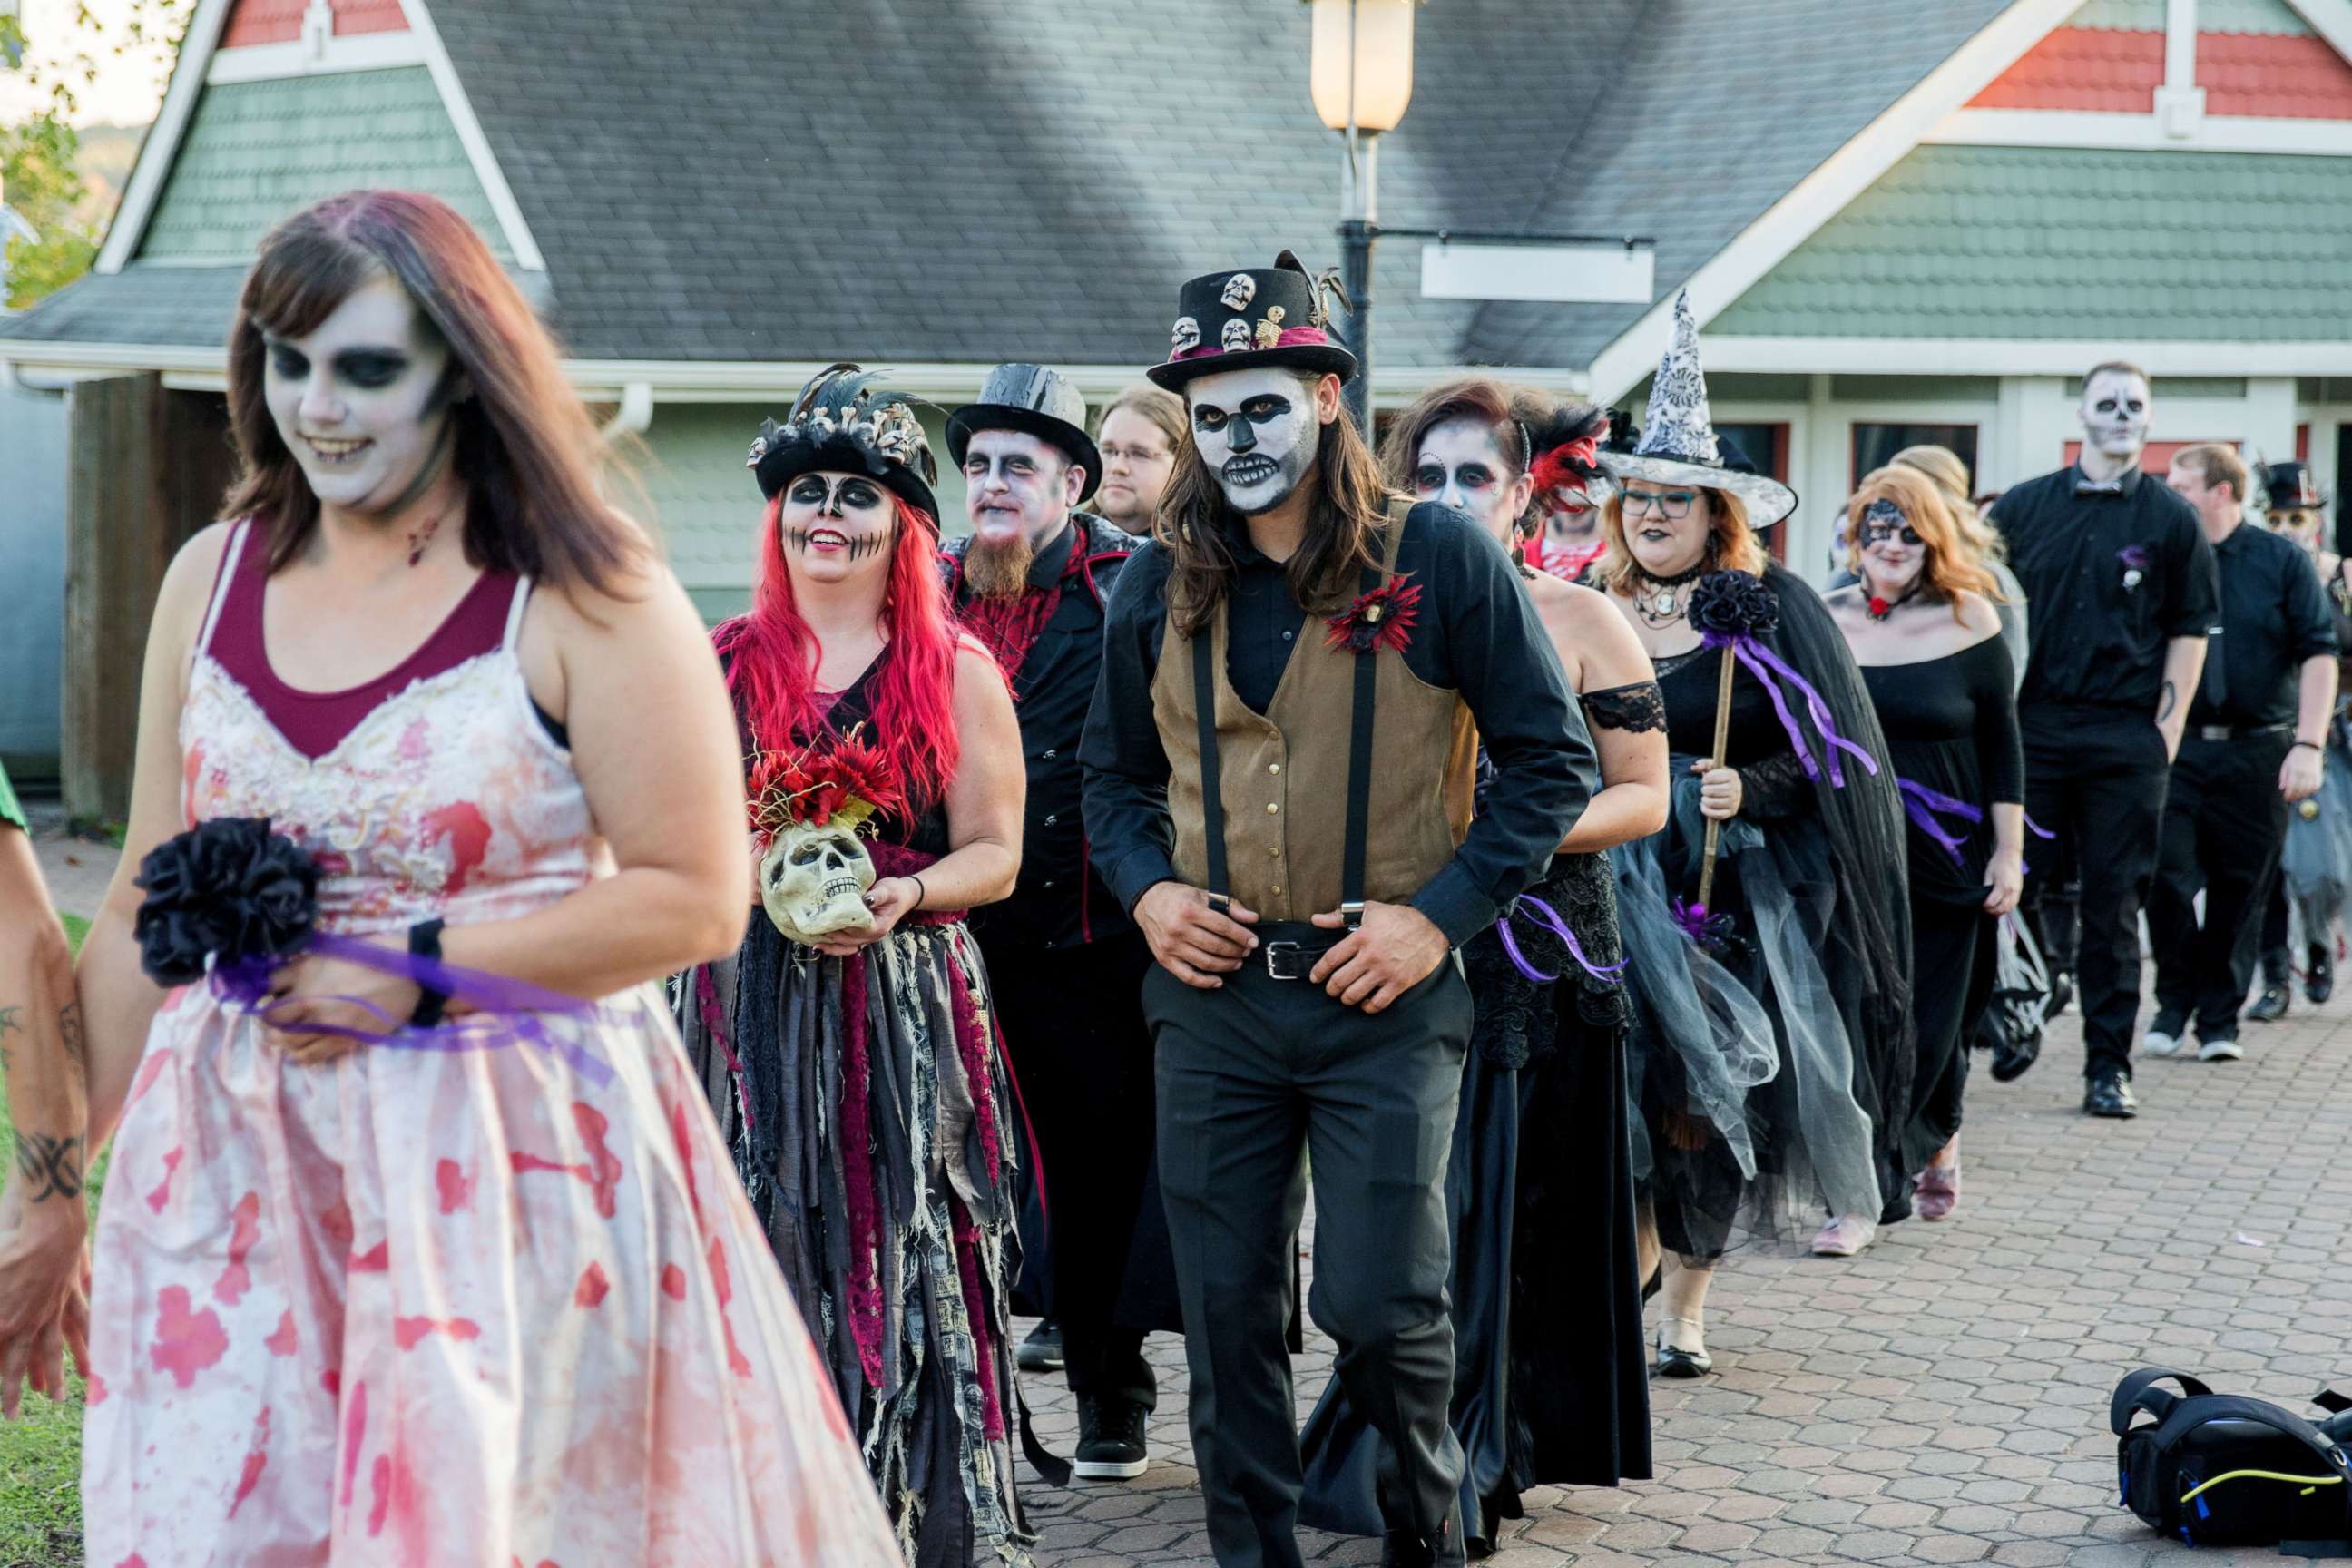 PHOTO: On Friday the 13th "newlydeads" tied the knot in a haunted HalloWedding event at Six Flags' Fright Fest in St. Louis